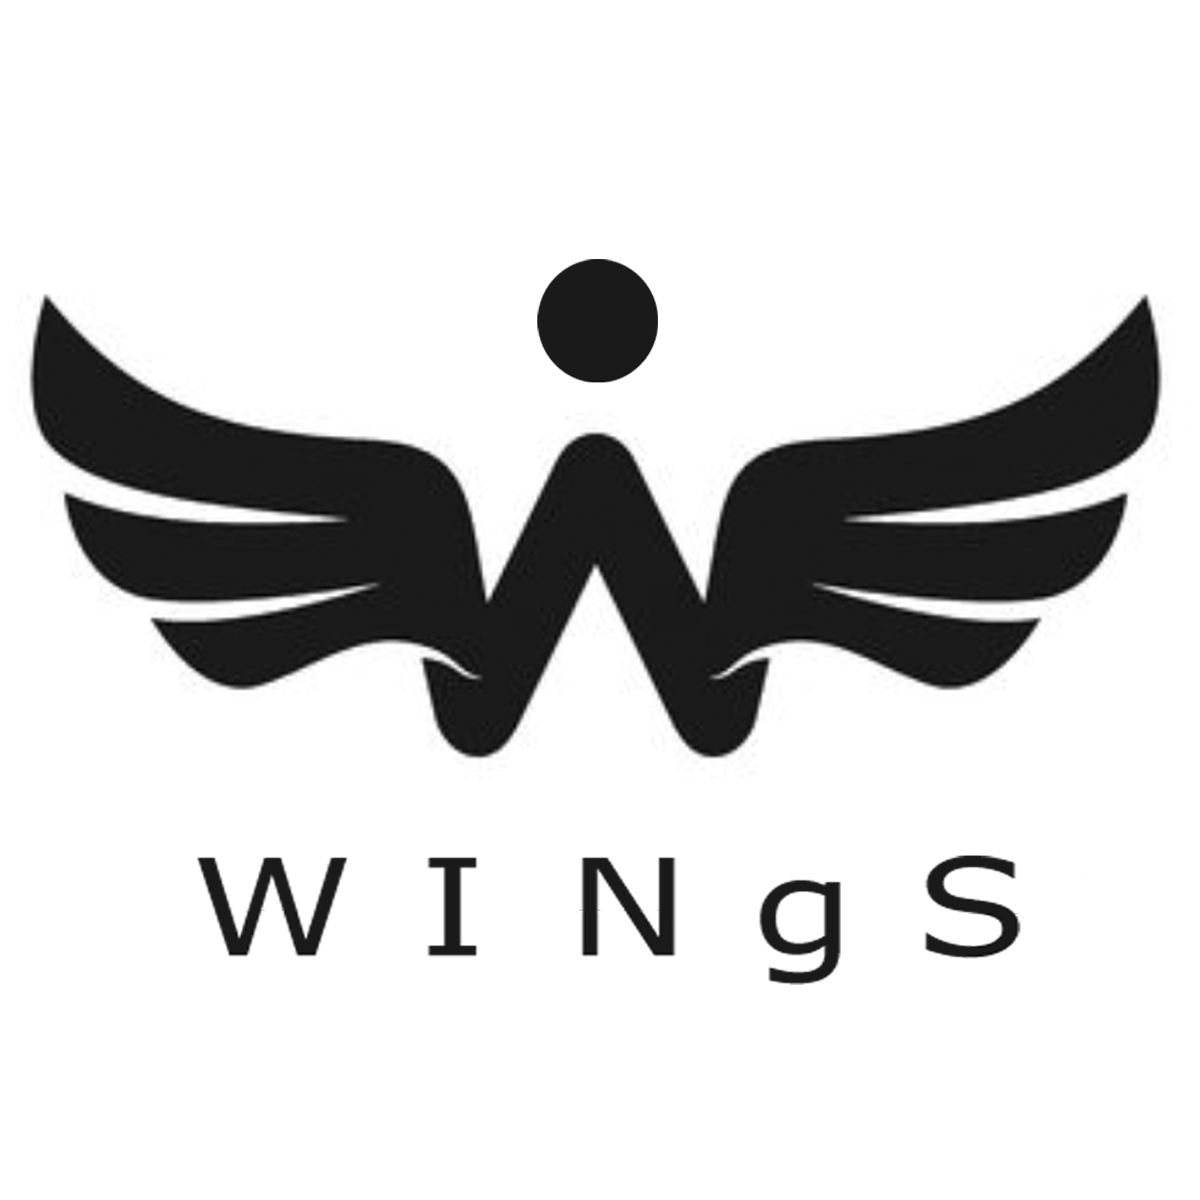 WINgS: motion capture for physical rehabilitation